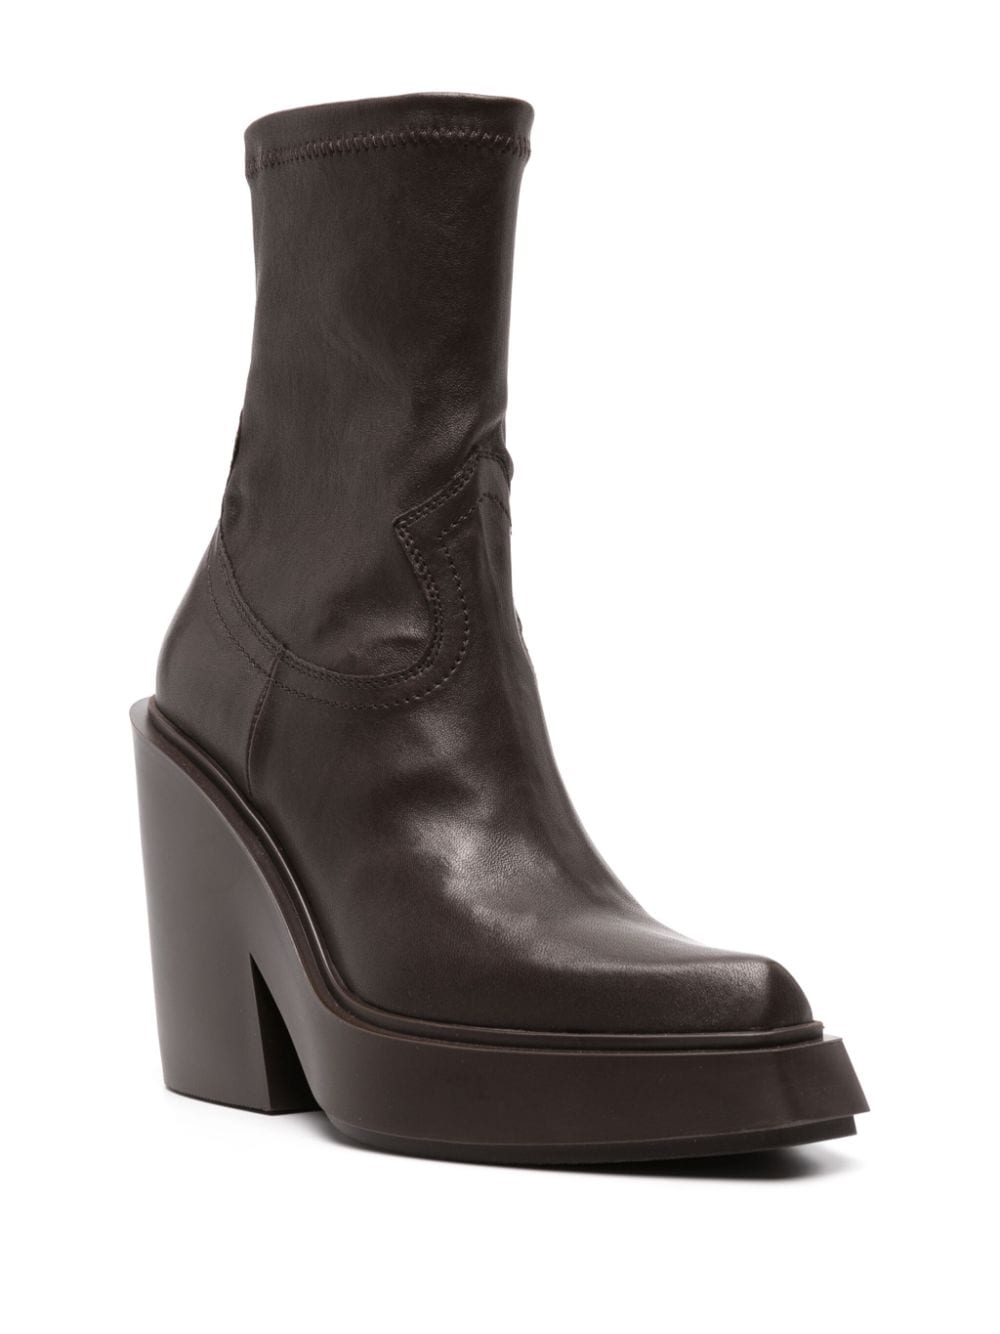 Vic Matie 115mm ankle leather boots - Bruin